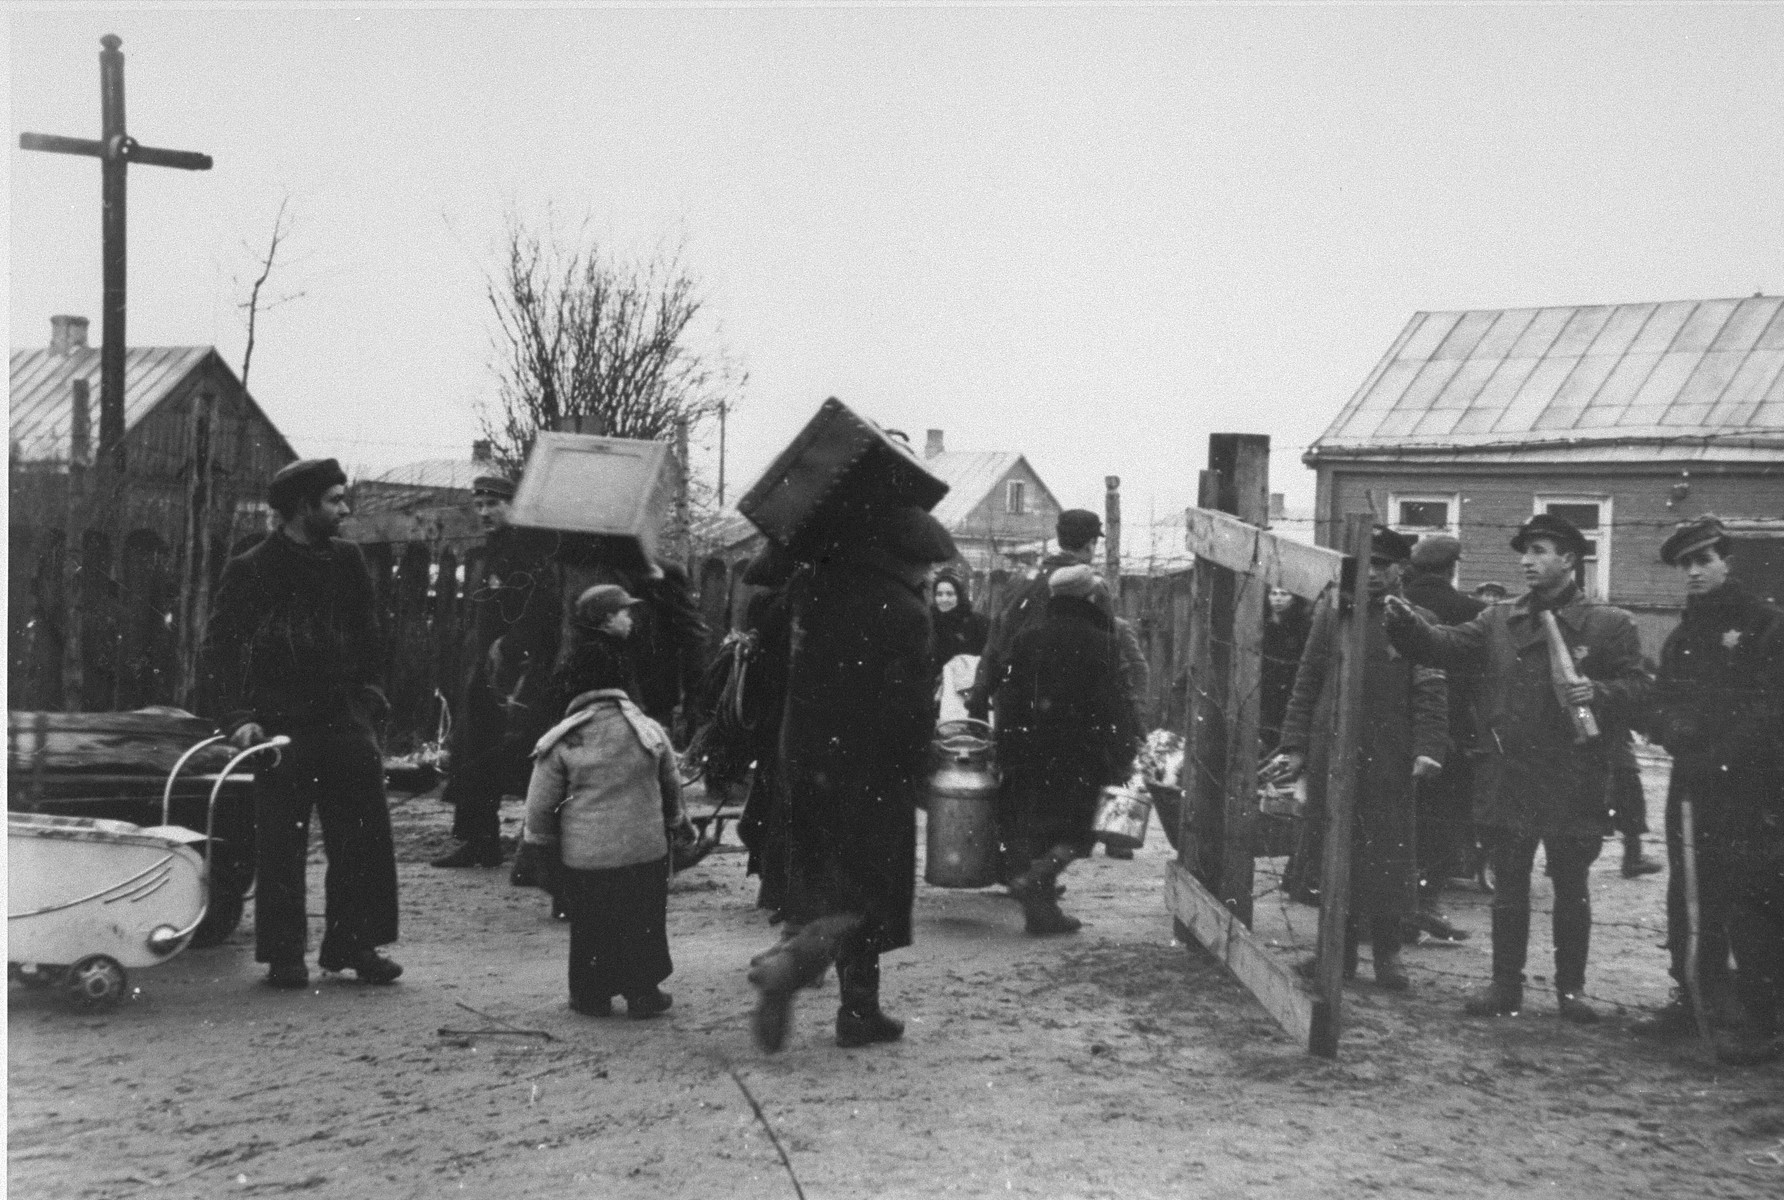 Residents of the ghetto move to new housing, probably after the Germans reduced the size of the Kovno ghetto.

Among those pictured are Abe Malnik (on the right) and Yankel Kaplan (second from the right), a ghetto firefighter.